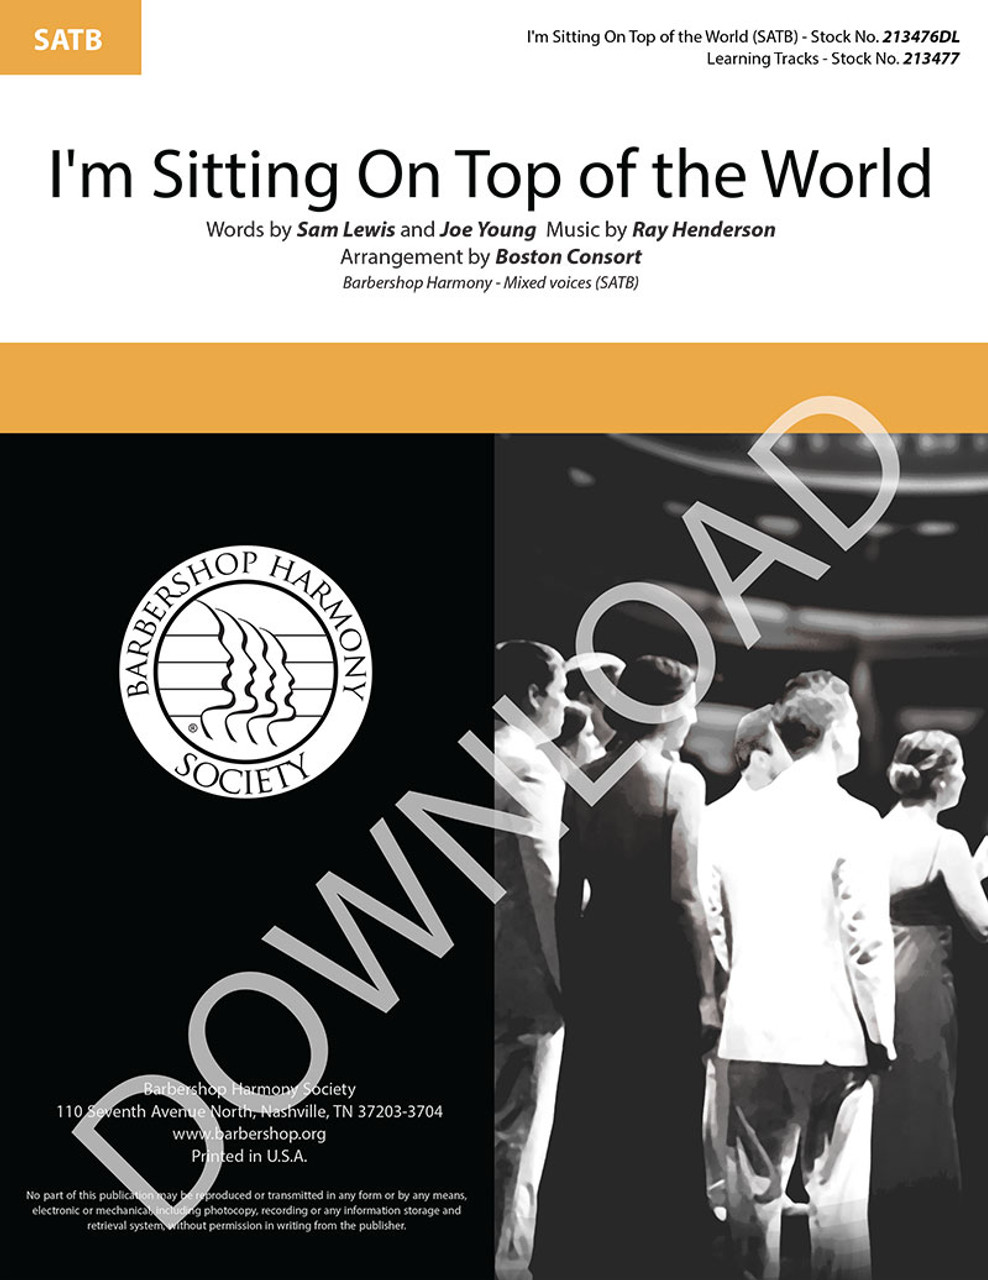 I'm Sitting On Top of the World (SATB) (arr. The Boston Consort) - Download